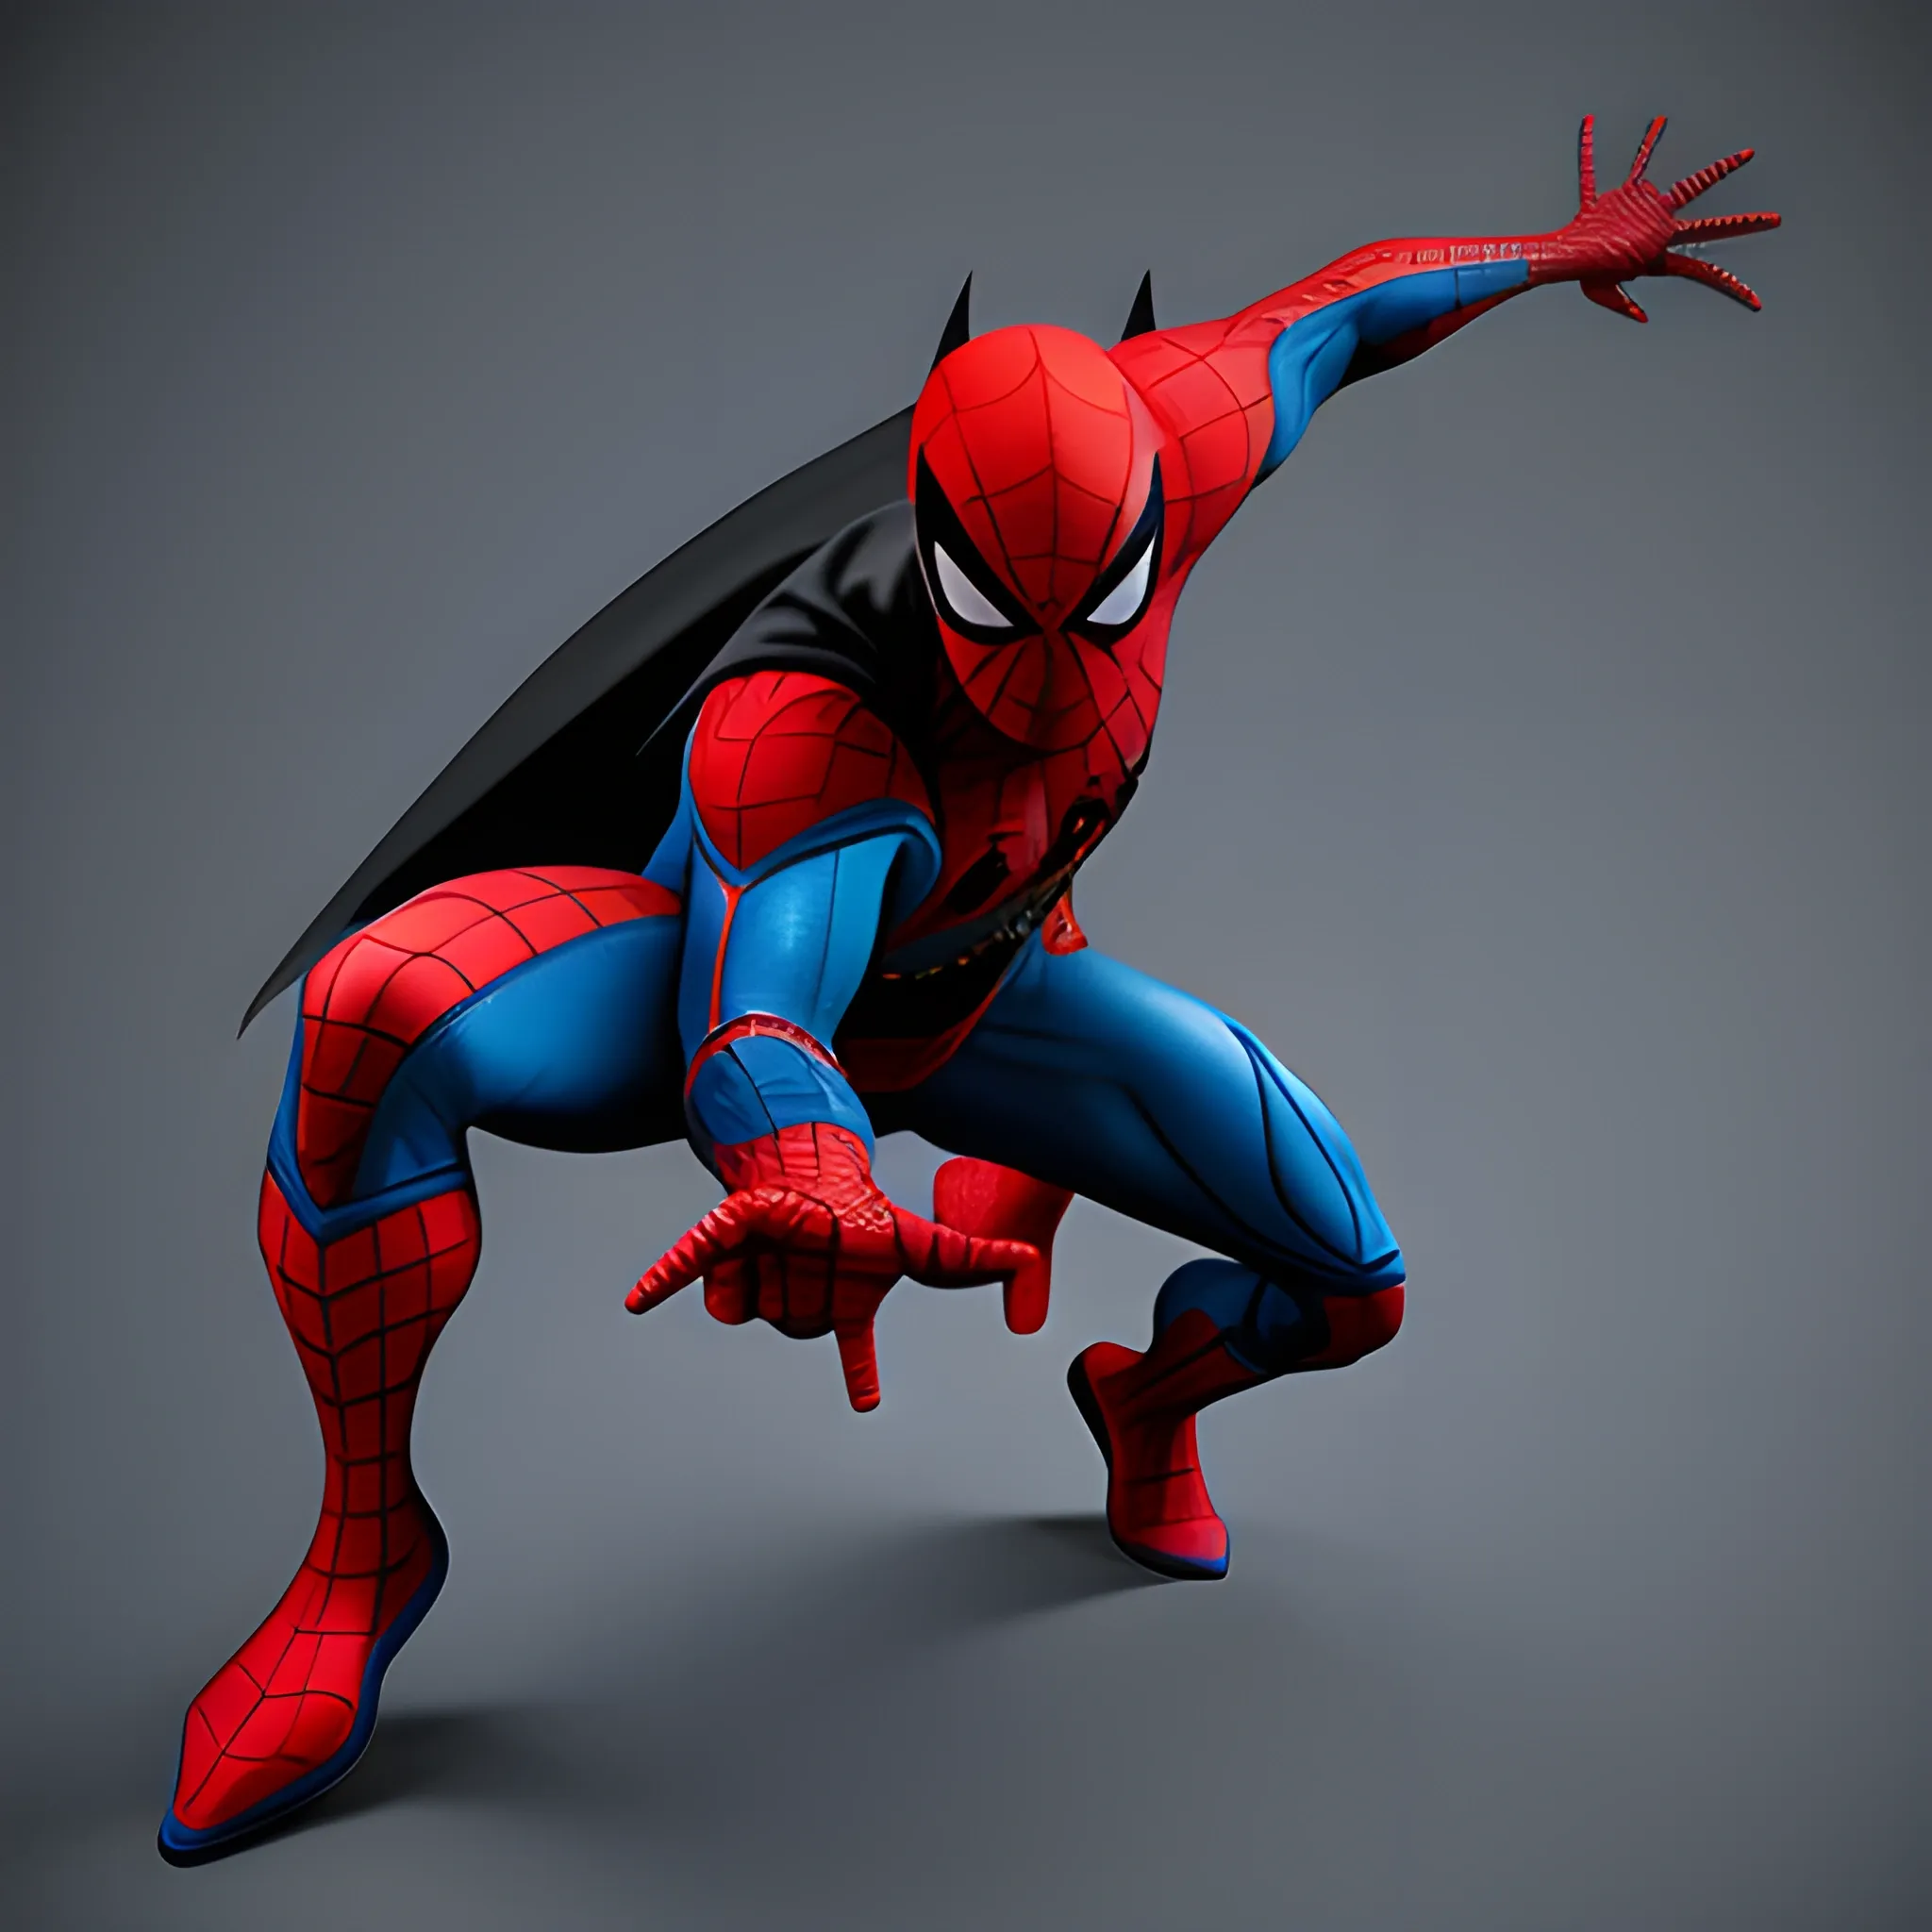 Why does only one hand posture help Spider-Man release the web? - Quora